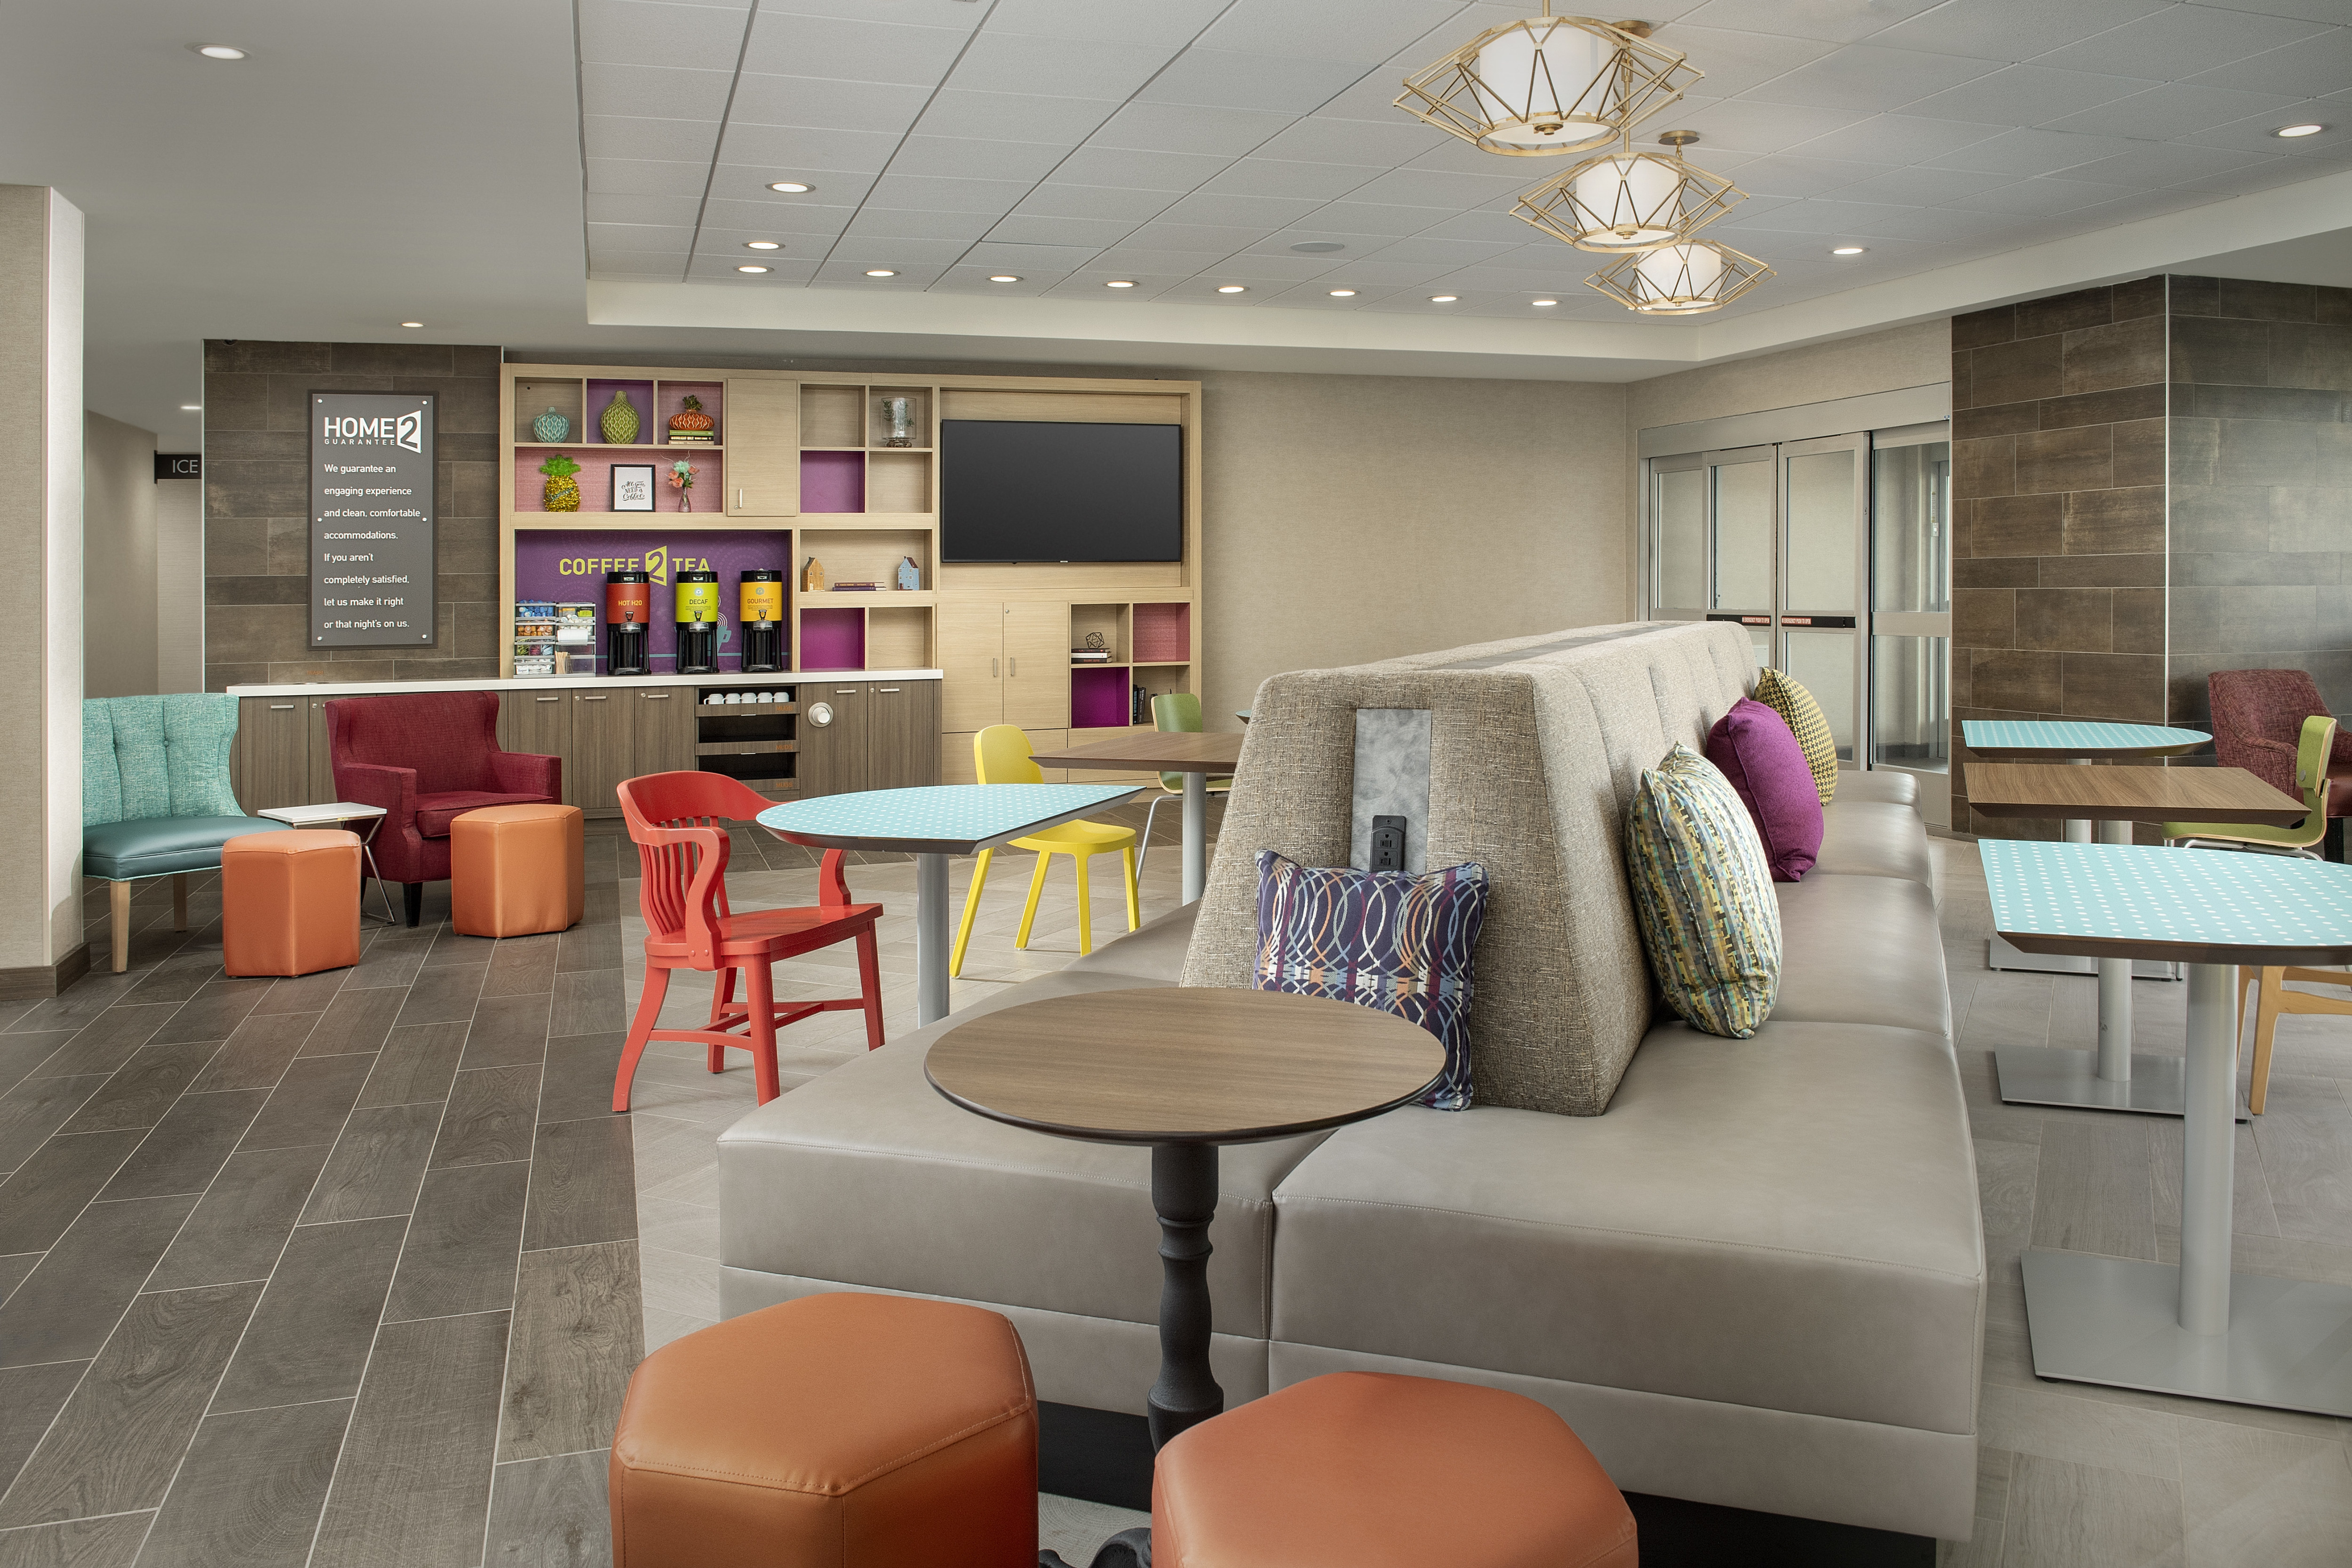 Lobby Seating Area With Beverage Station